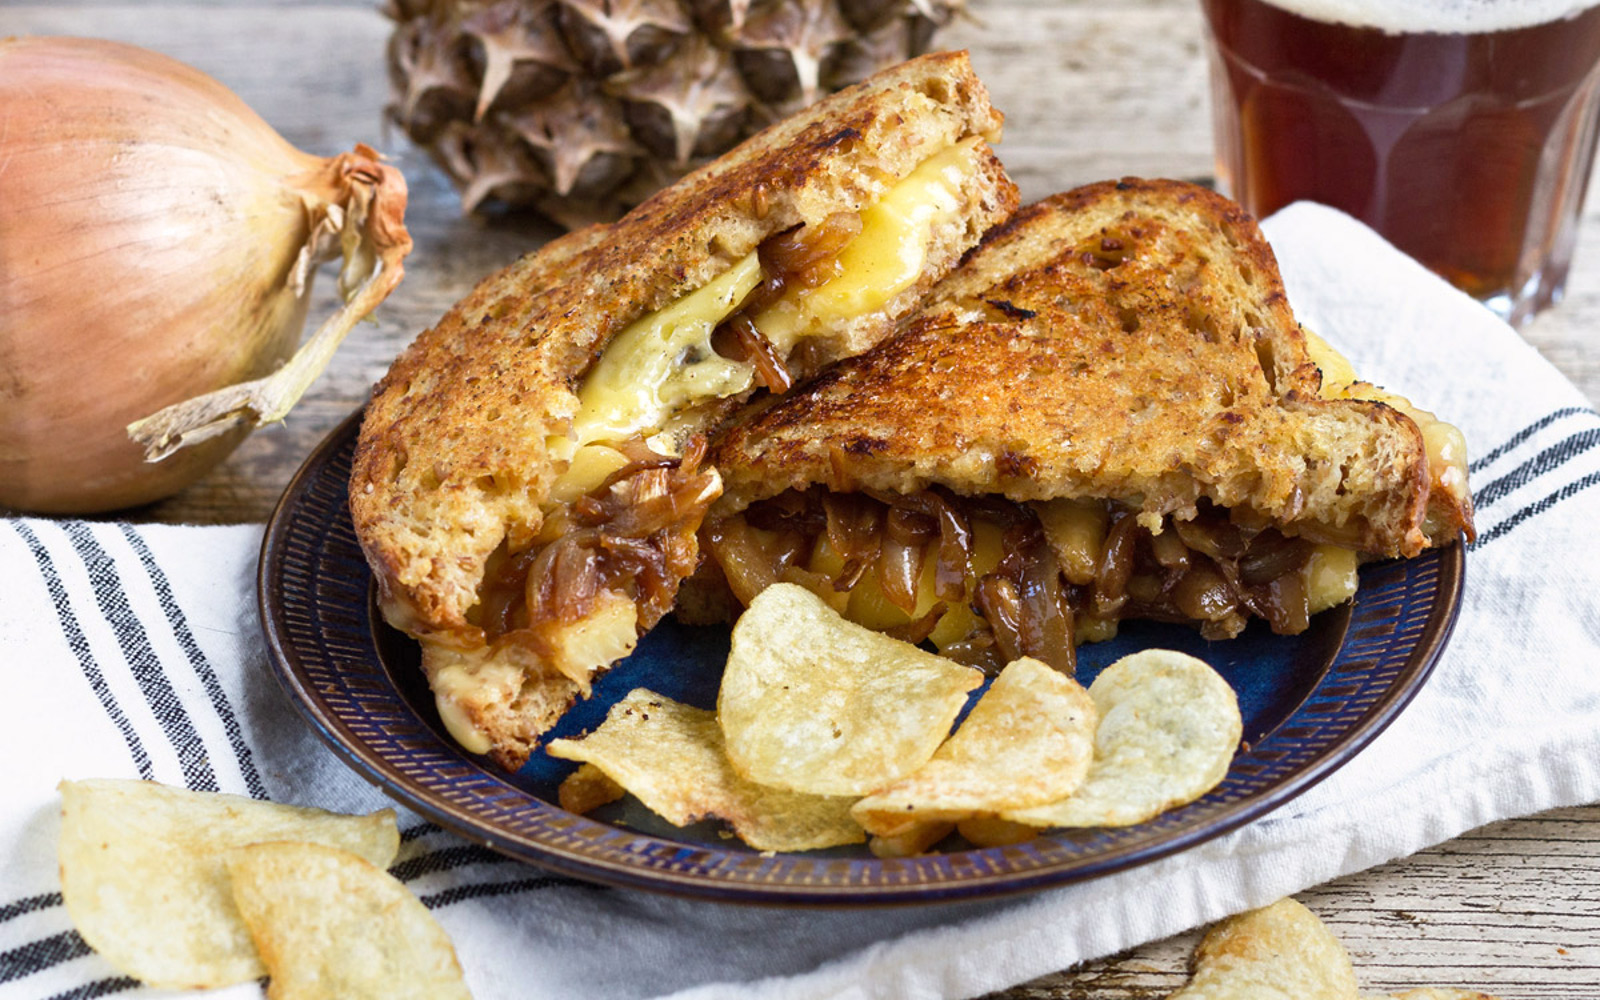 Grilled Cheese With Caramelized Onions and Pineapple